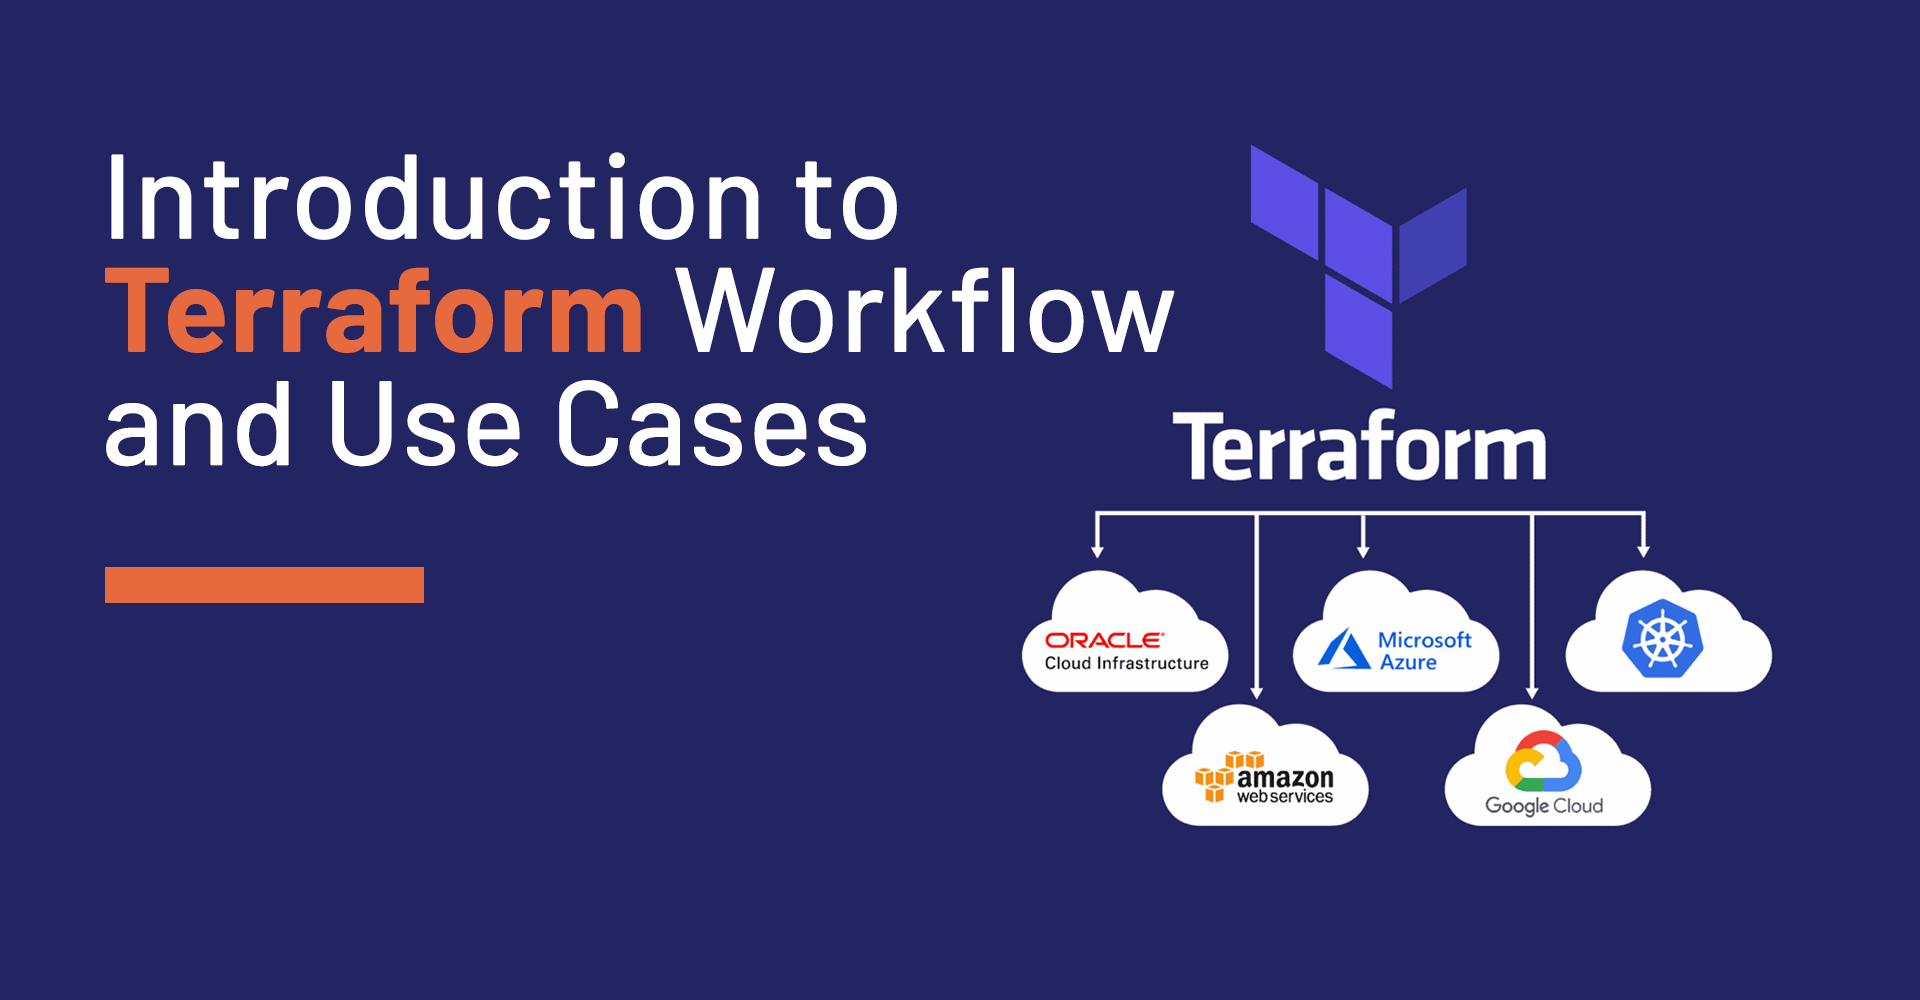 Introduction to Terraform Workflow and Use Cases